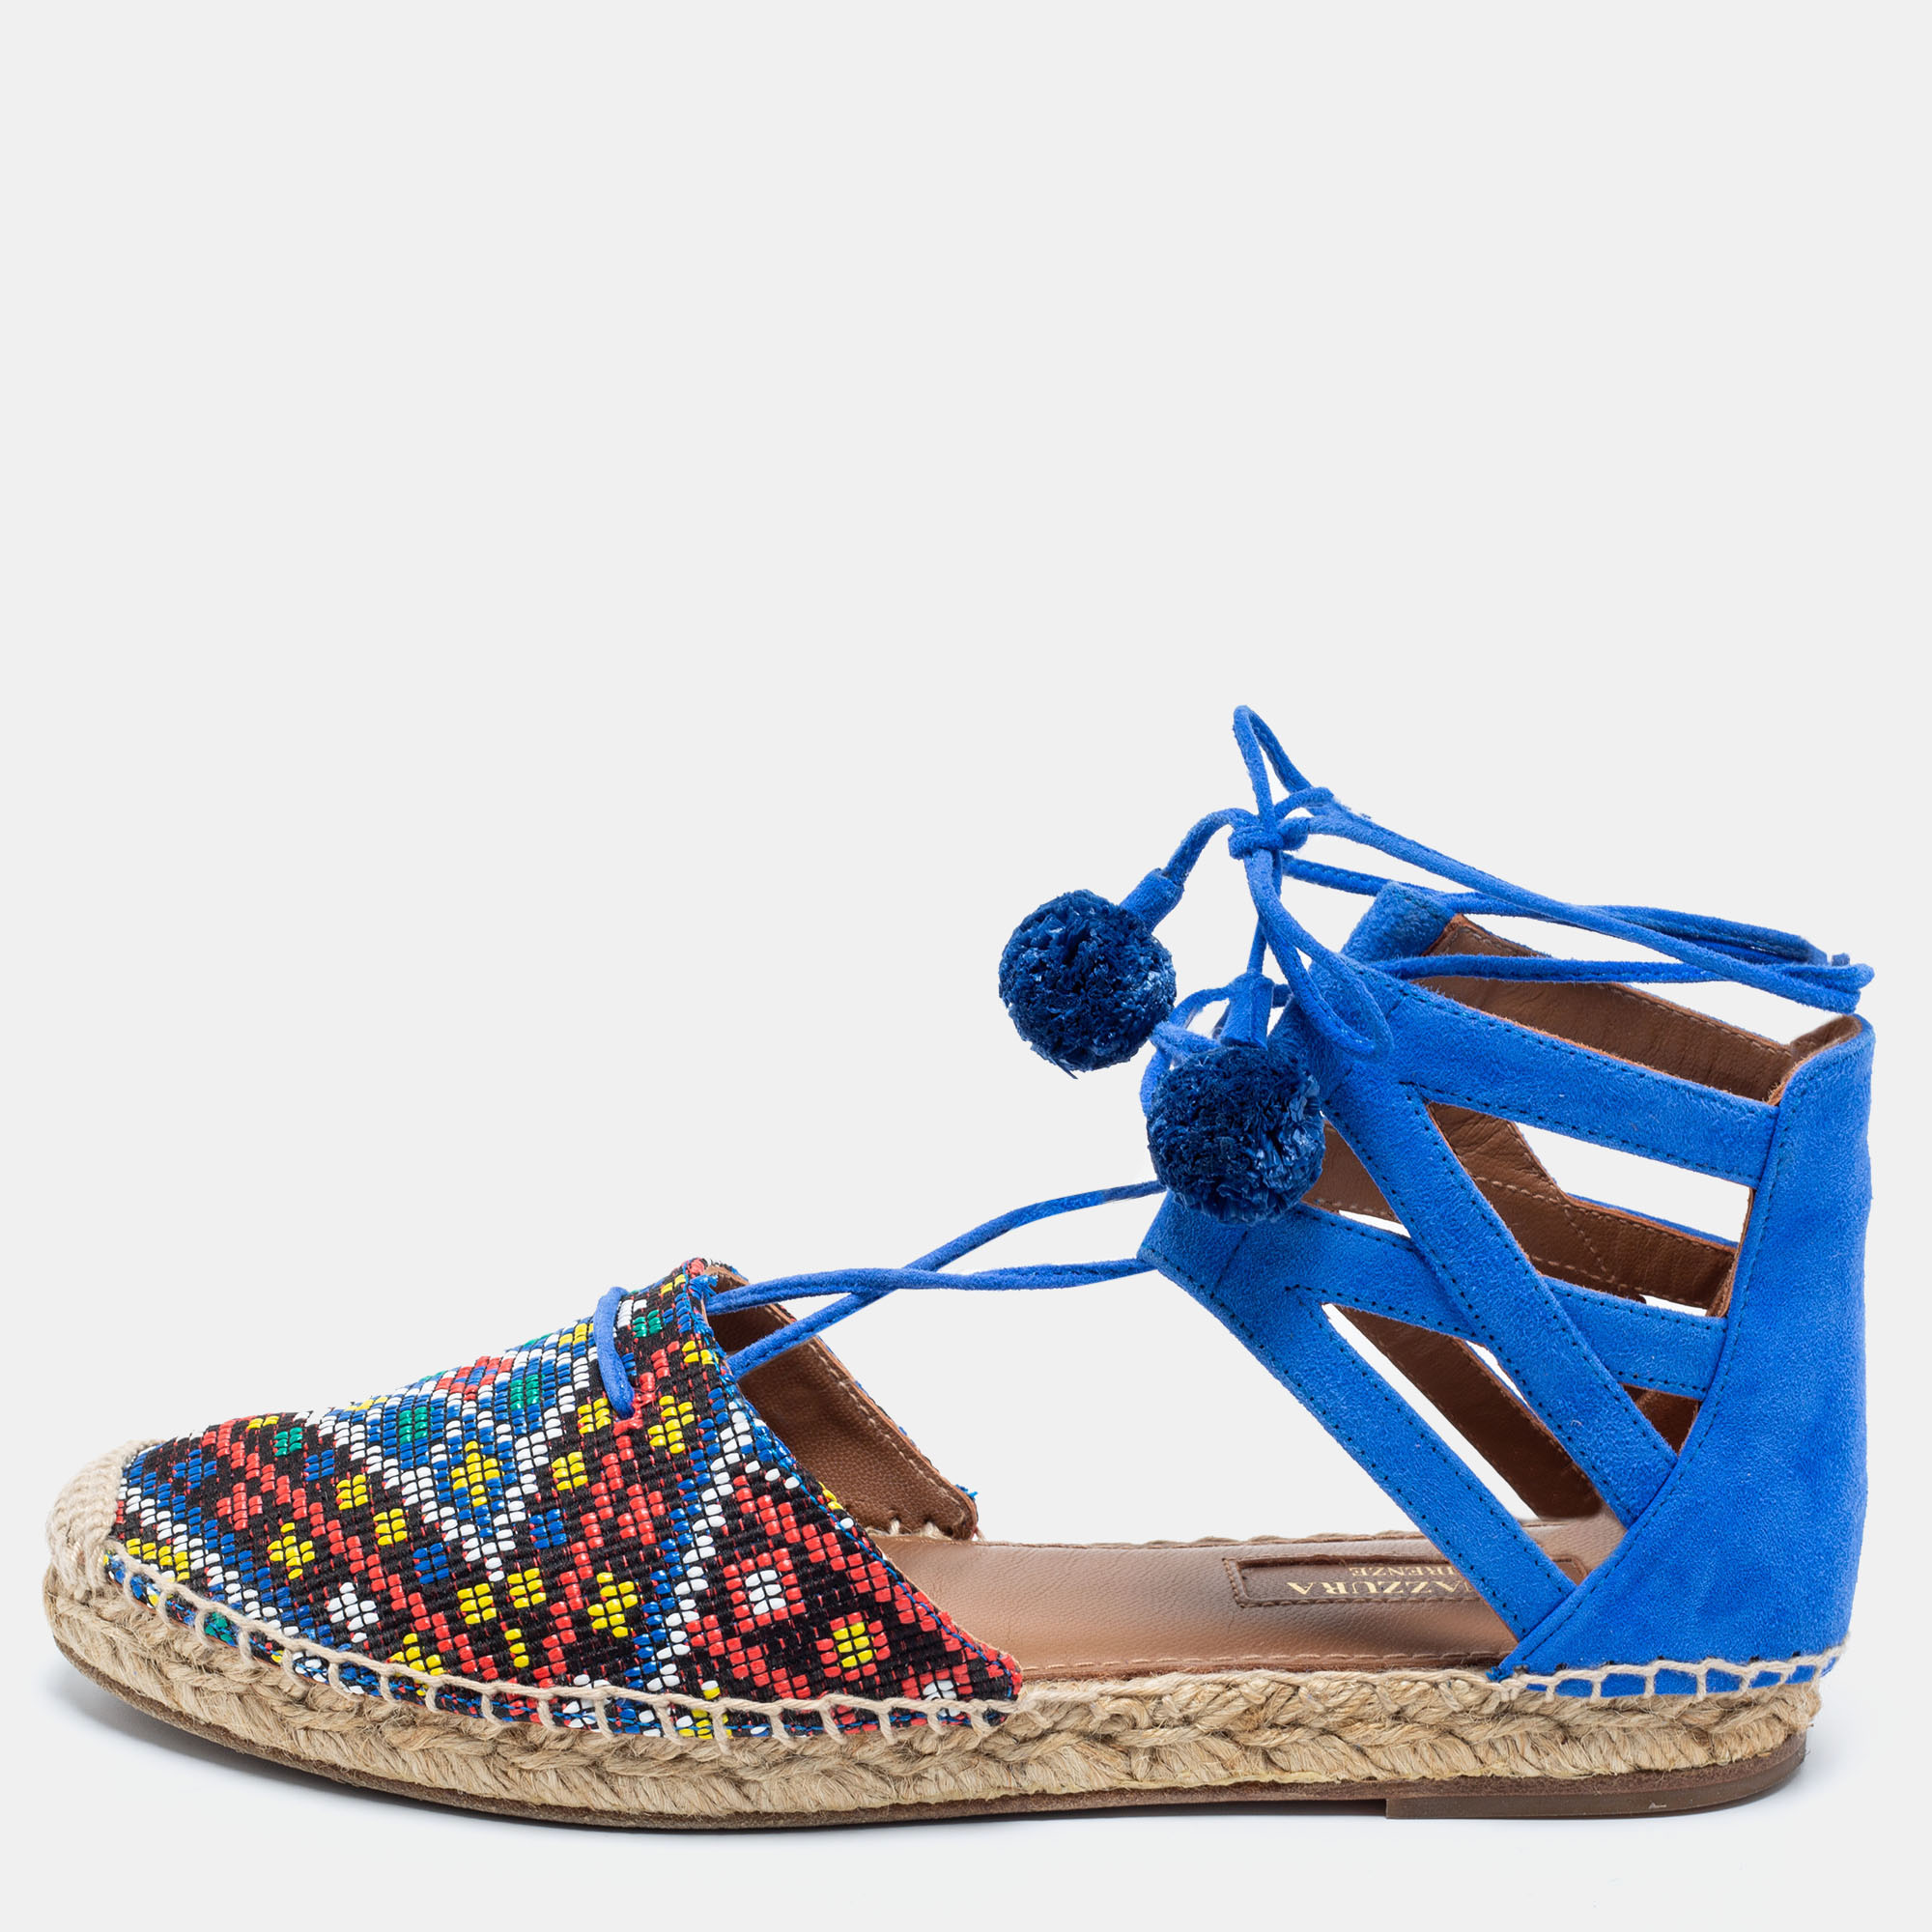 These Belgravia flat sandals from Aquazzura are super sturdy comfy and stunning. They are crafted from blue raffia and suede on the exterior and come with a lace up feature and espadrilles. Add this trendy creation to your collection now